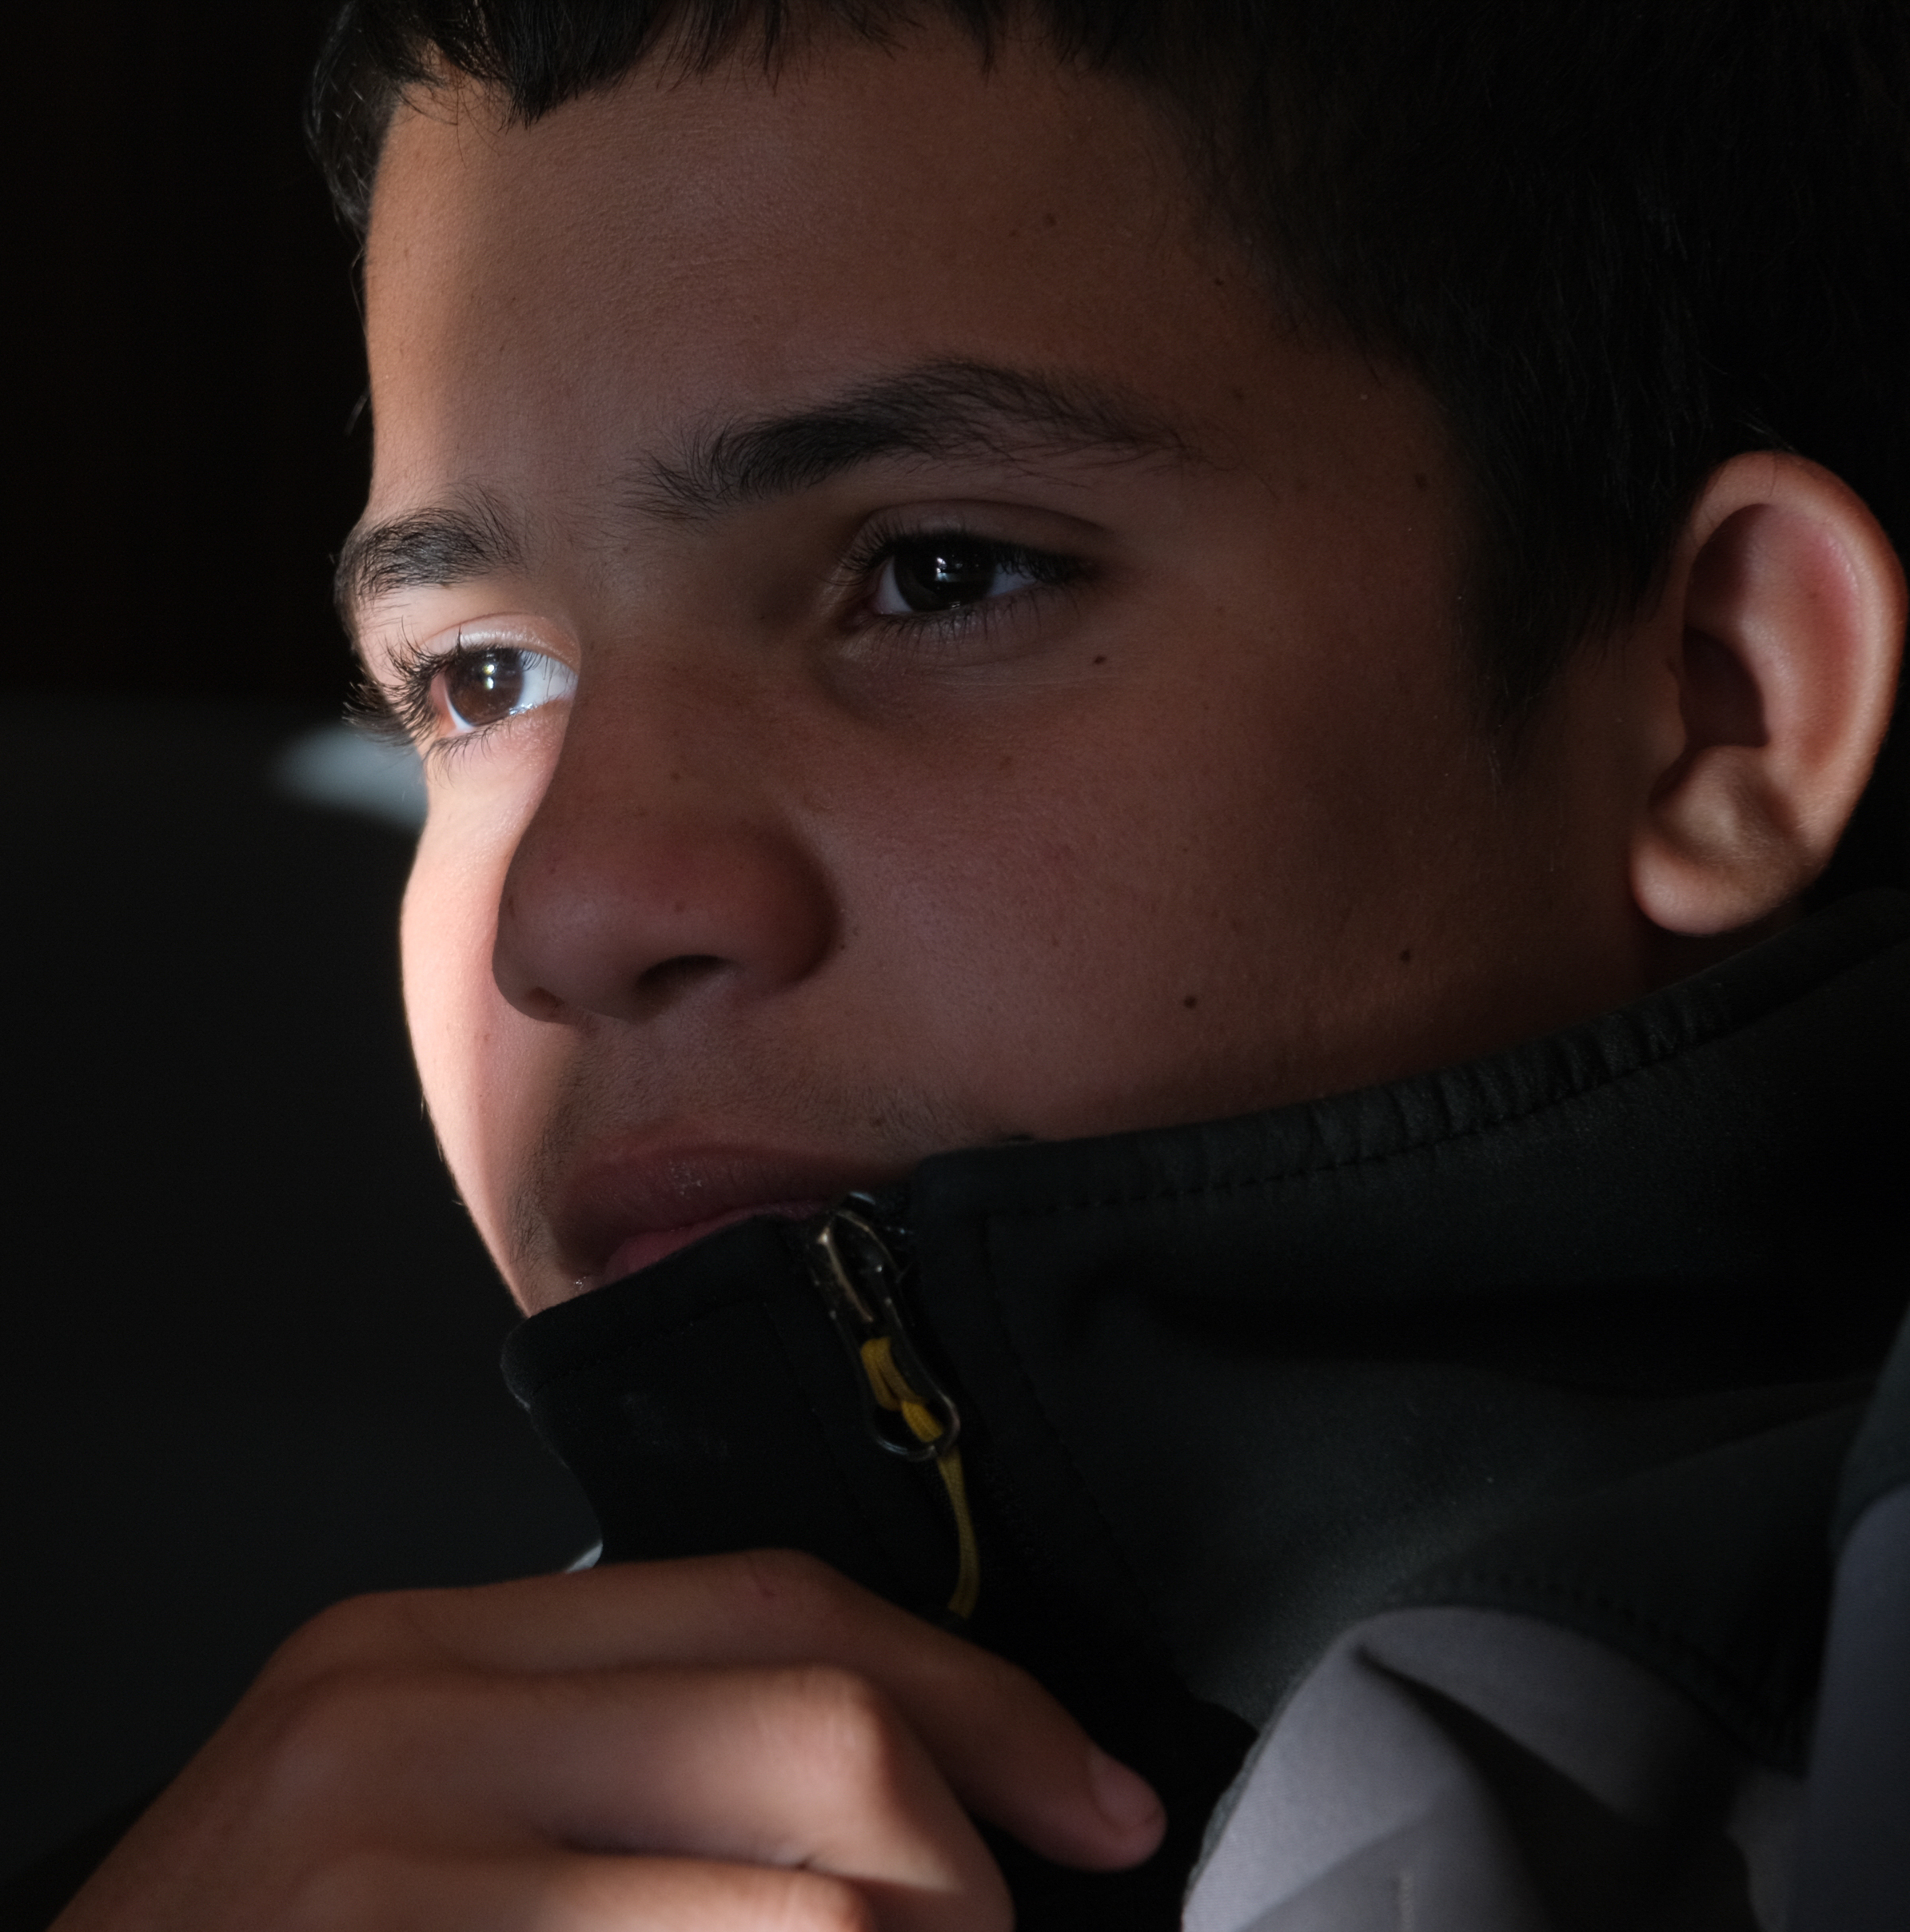 A close-up of a pensive young boy with his chin resting on his hand, wearing a zipped-up jacket.